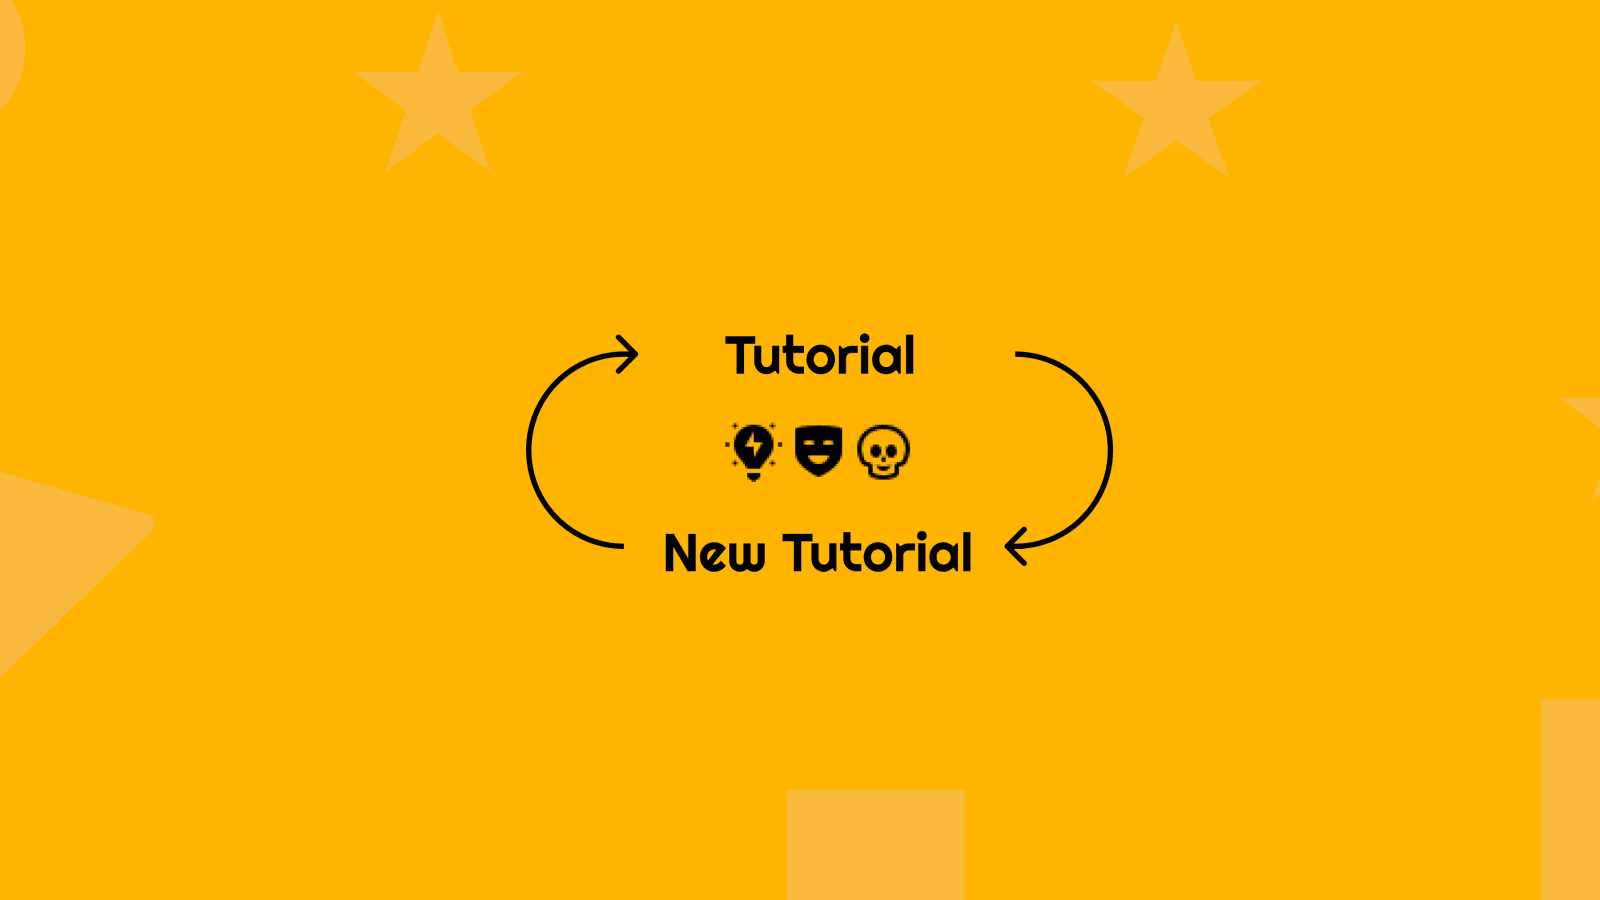 Circular arrows show a tutorial on one end and another tutorial on the other end